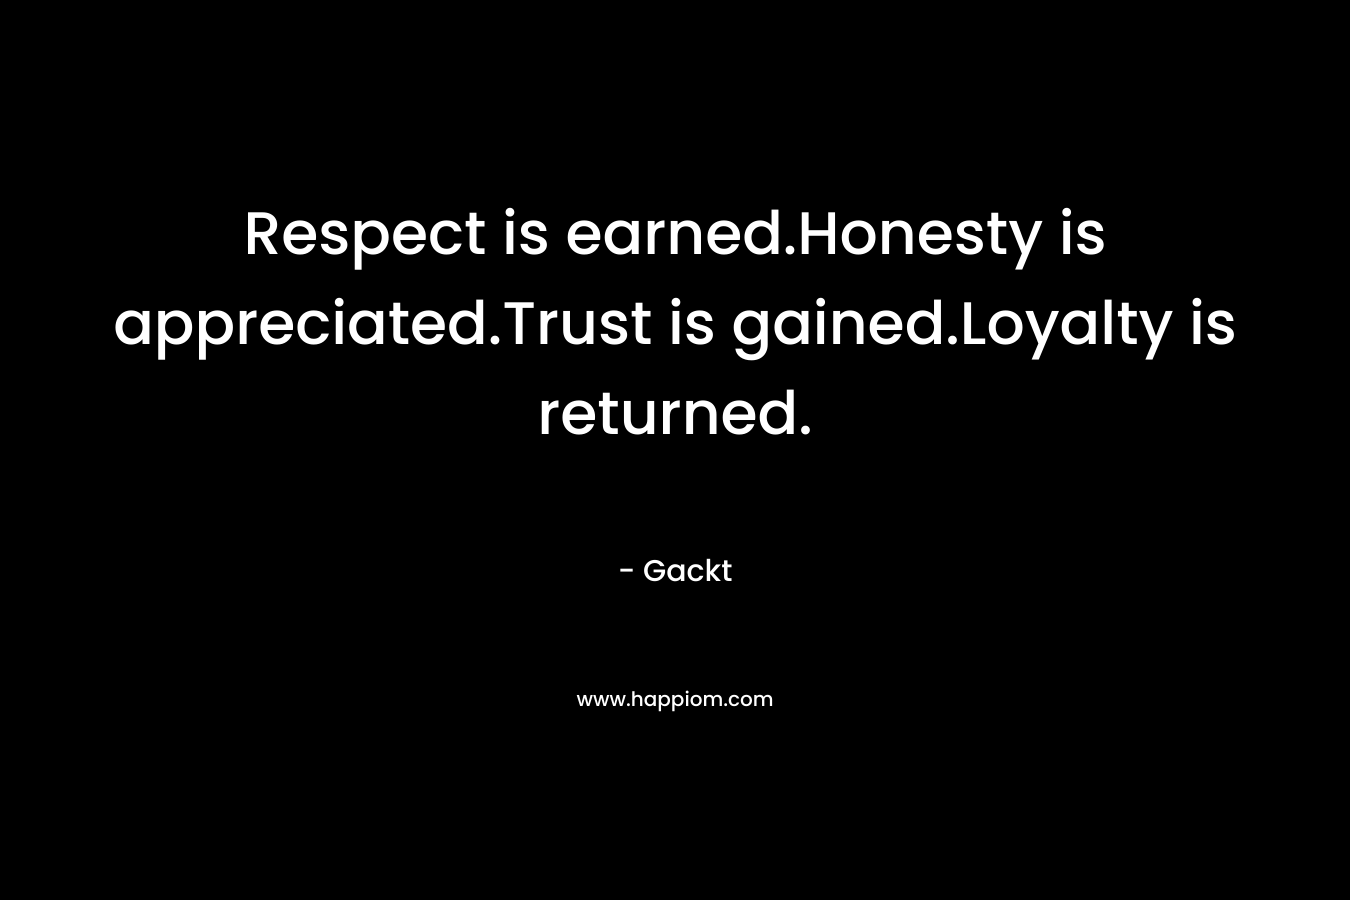 Respect is earned.Honesty is appreciated.Trust is gained.Loyalty is returned.